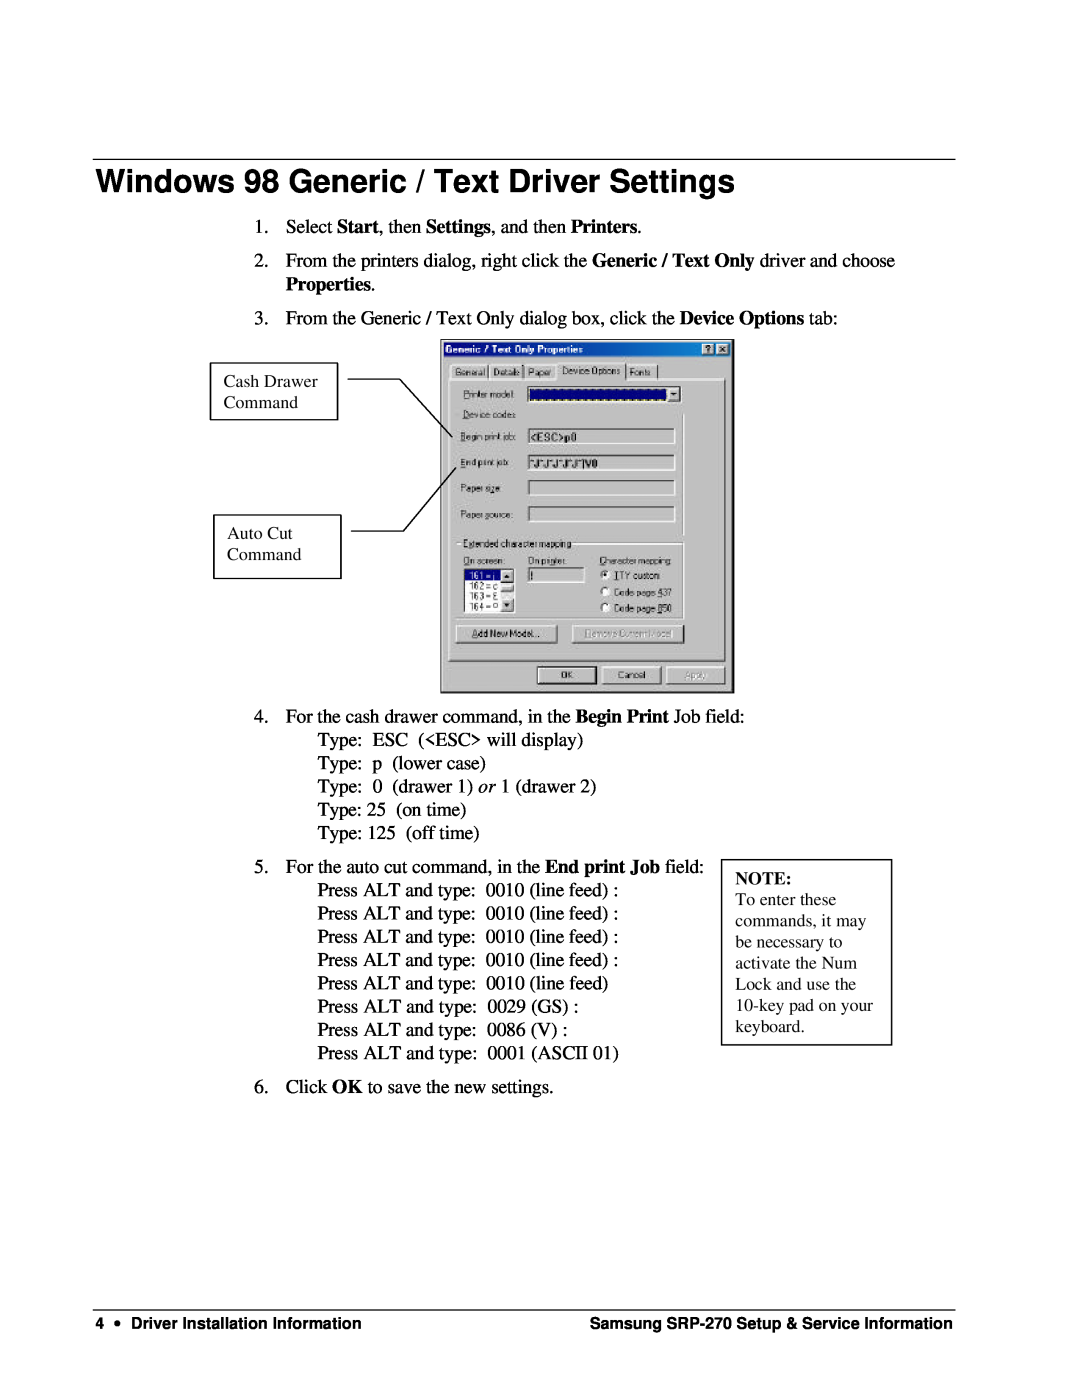 Samsung SRP-270 specifications Windows 98 Generic / Text Driver Settings, Cash Drawer Command Auto Cut Command 